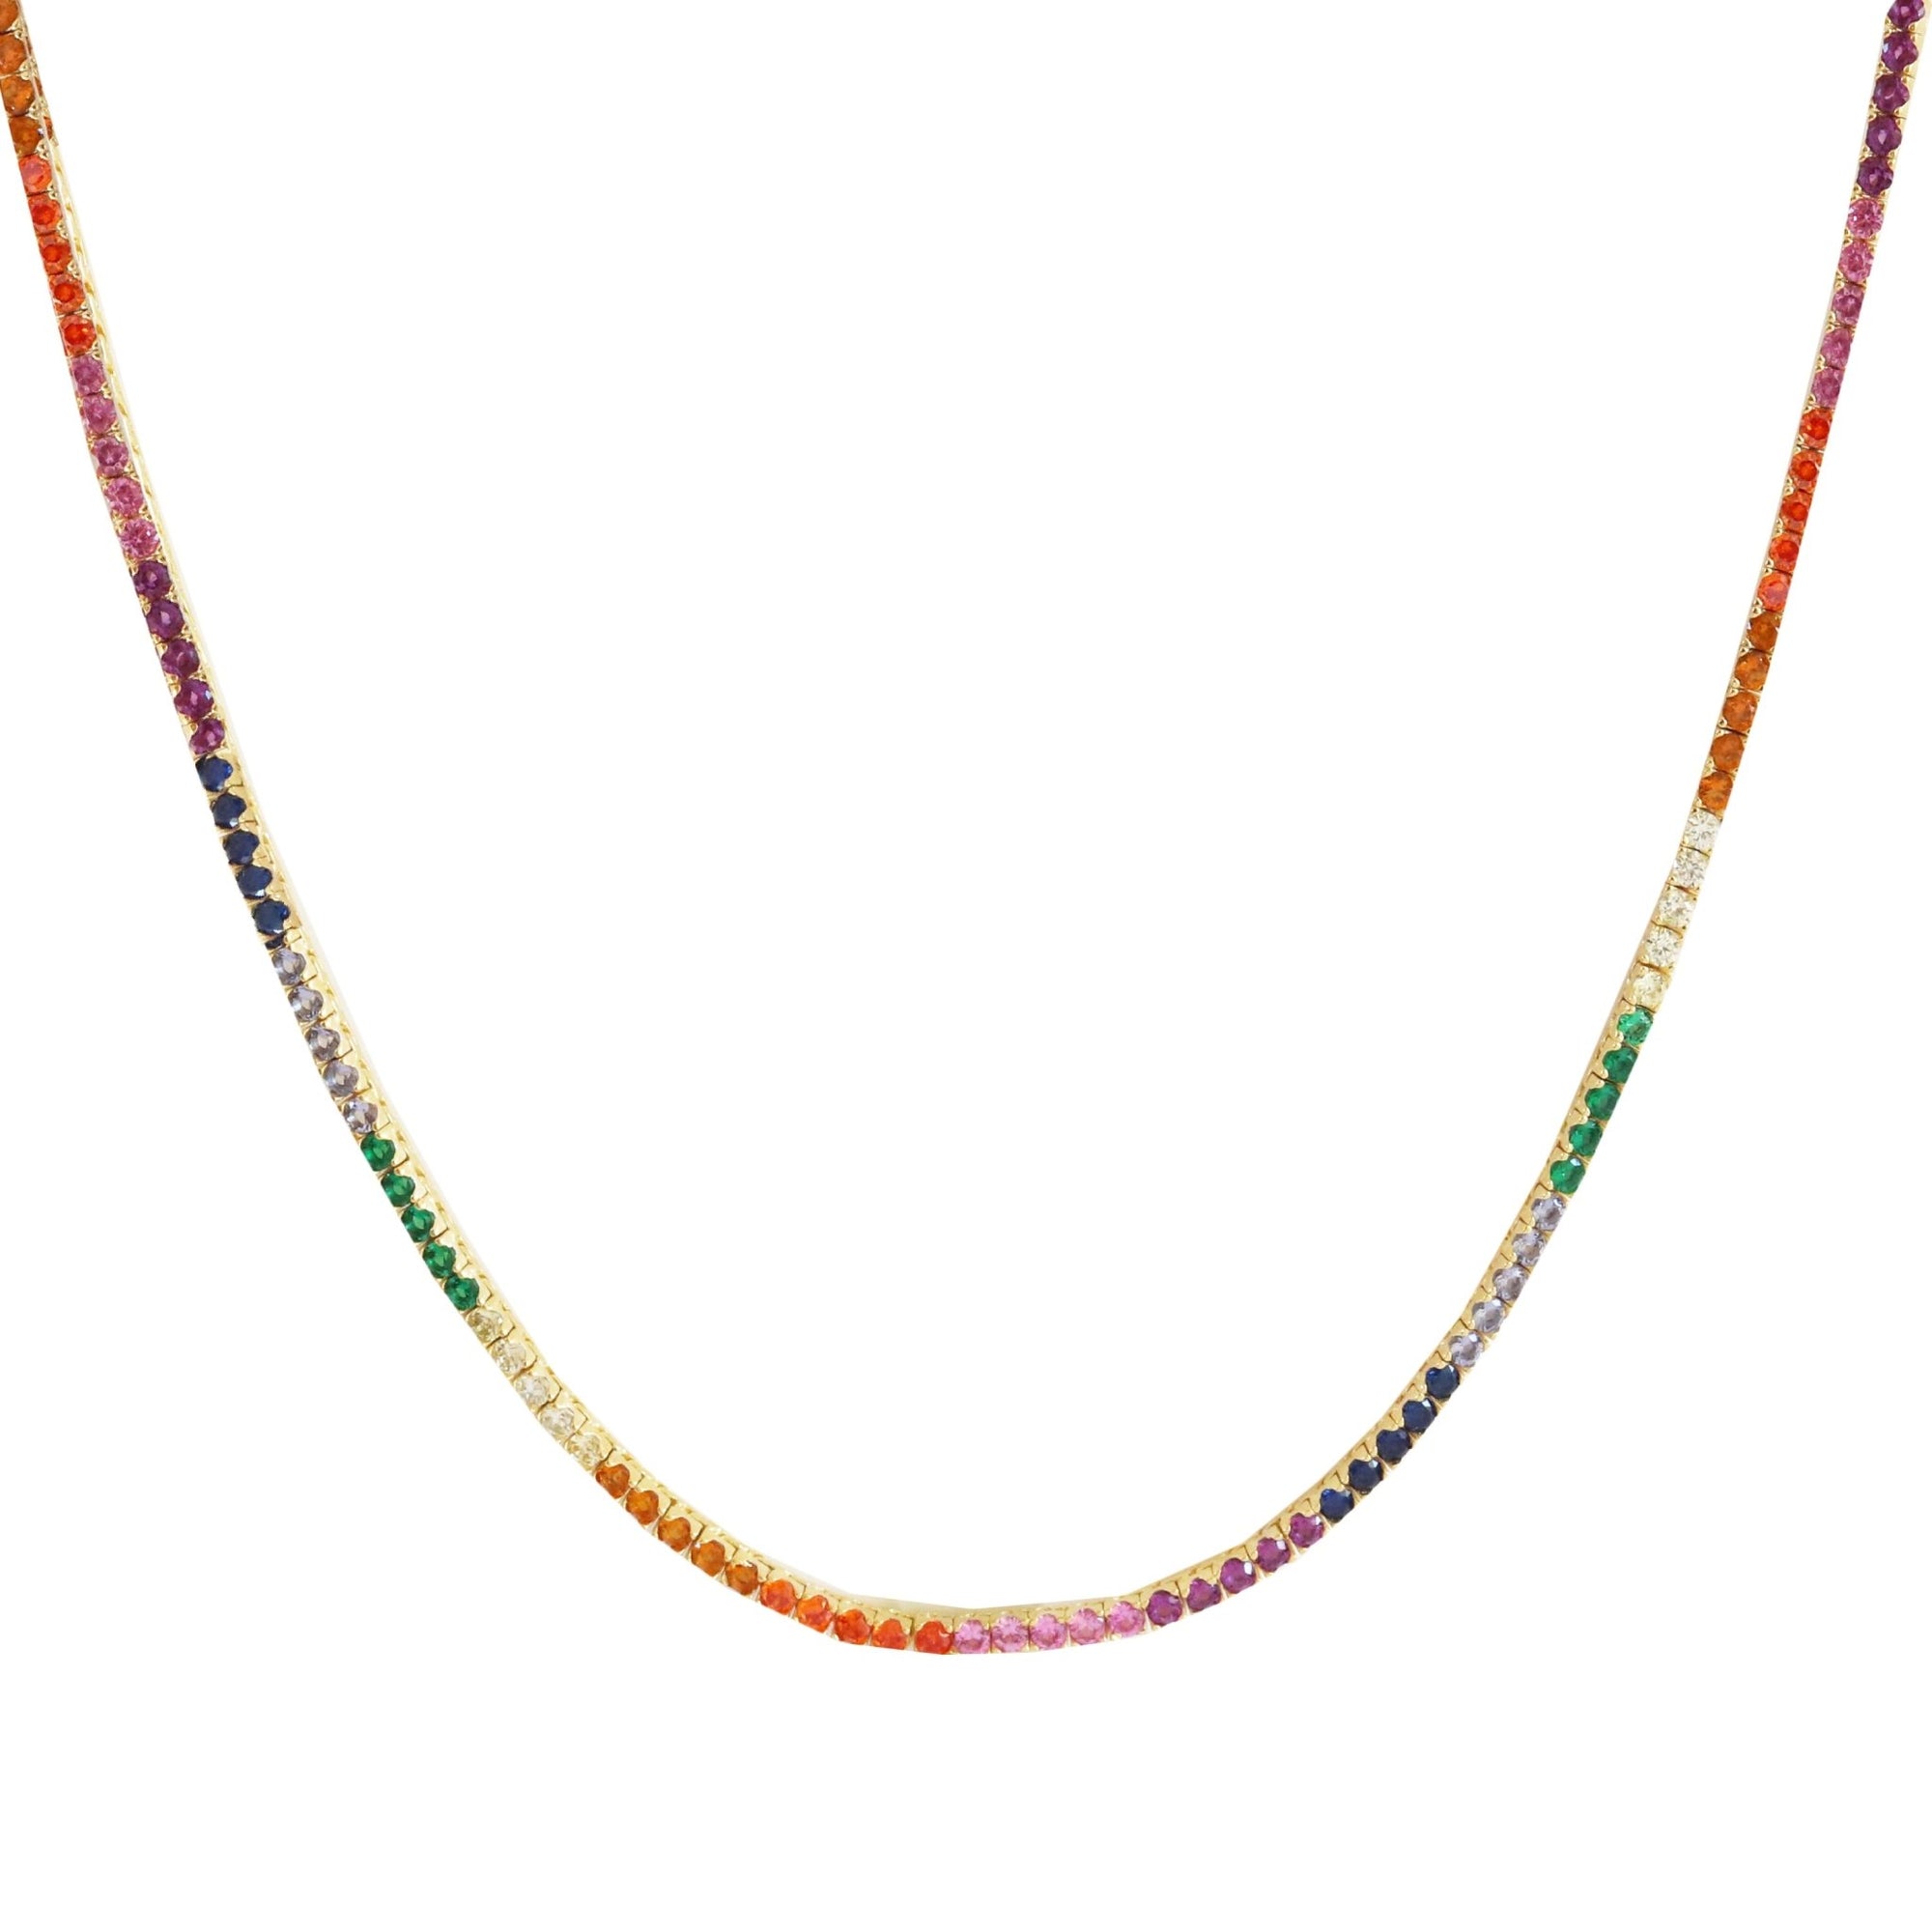 LOVE TENNIS NECKLACE - RAINBOW CUBIC ZIRCONIA & GOLD - SO PRETTY CARA COTTER